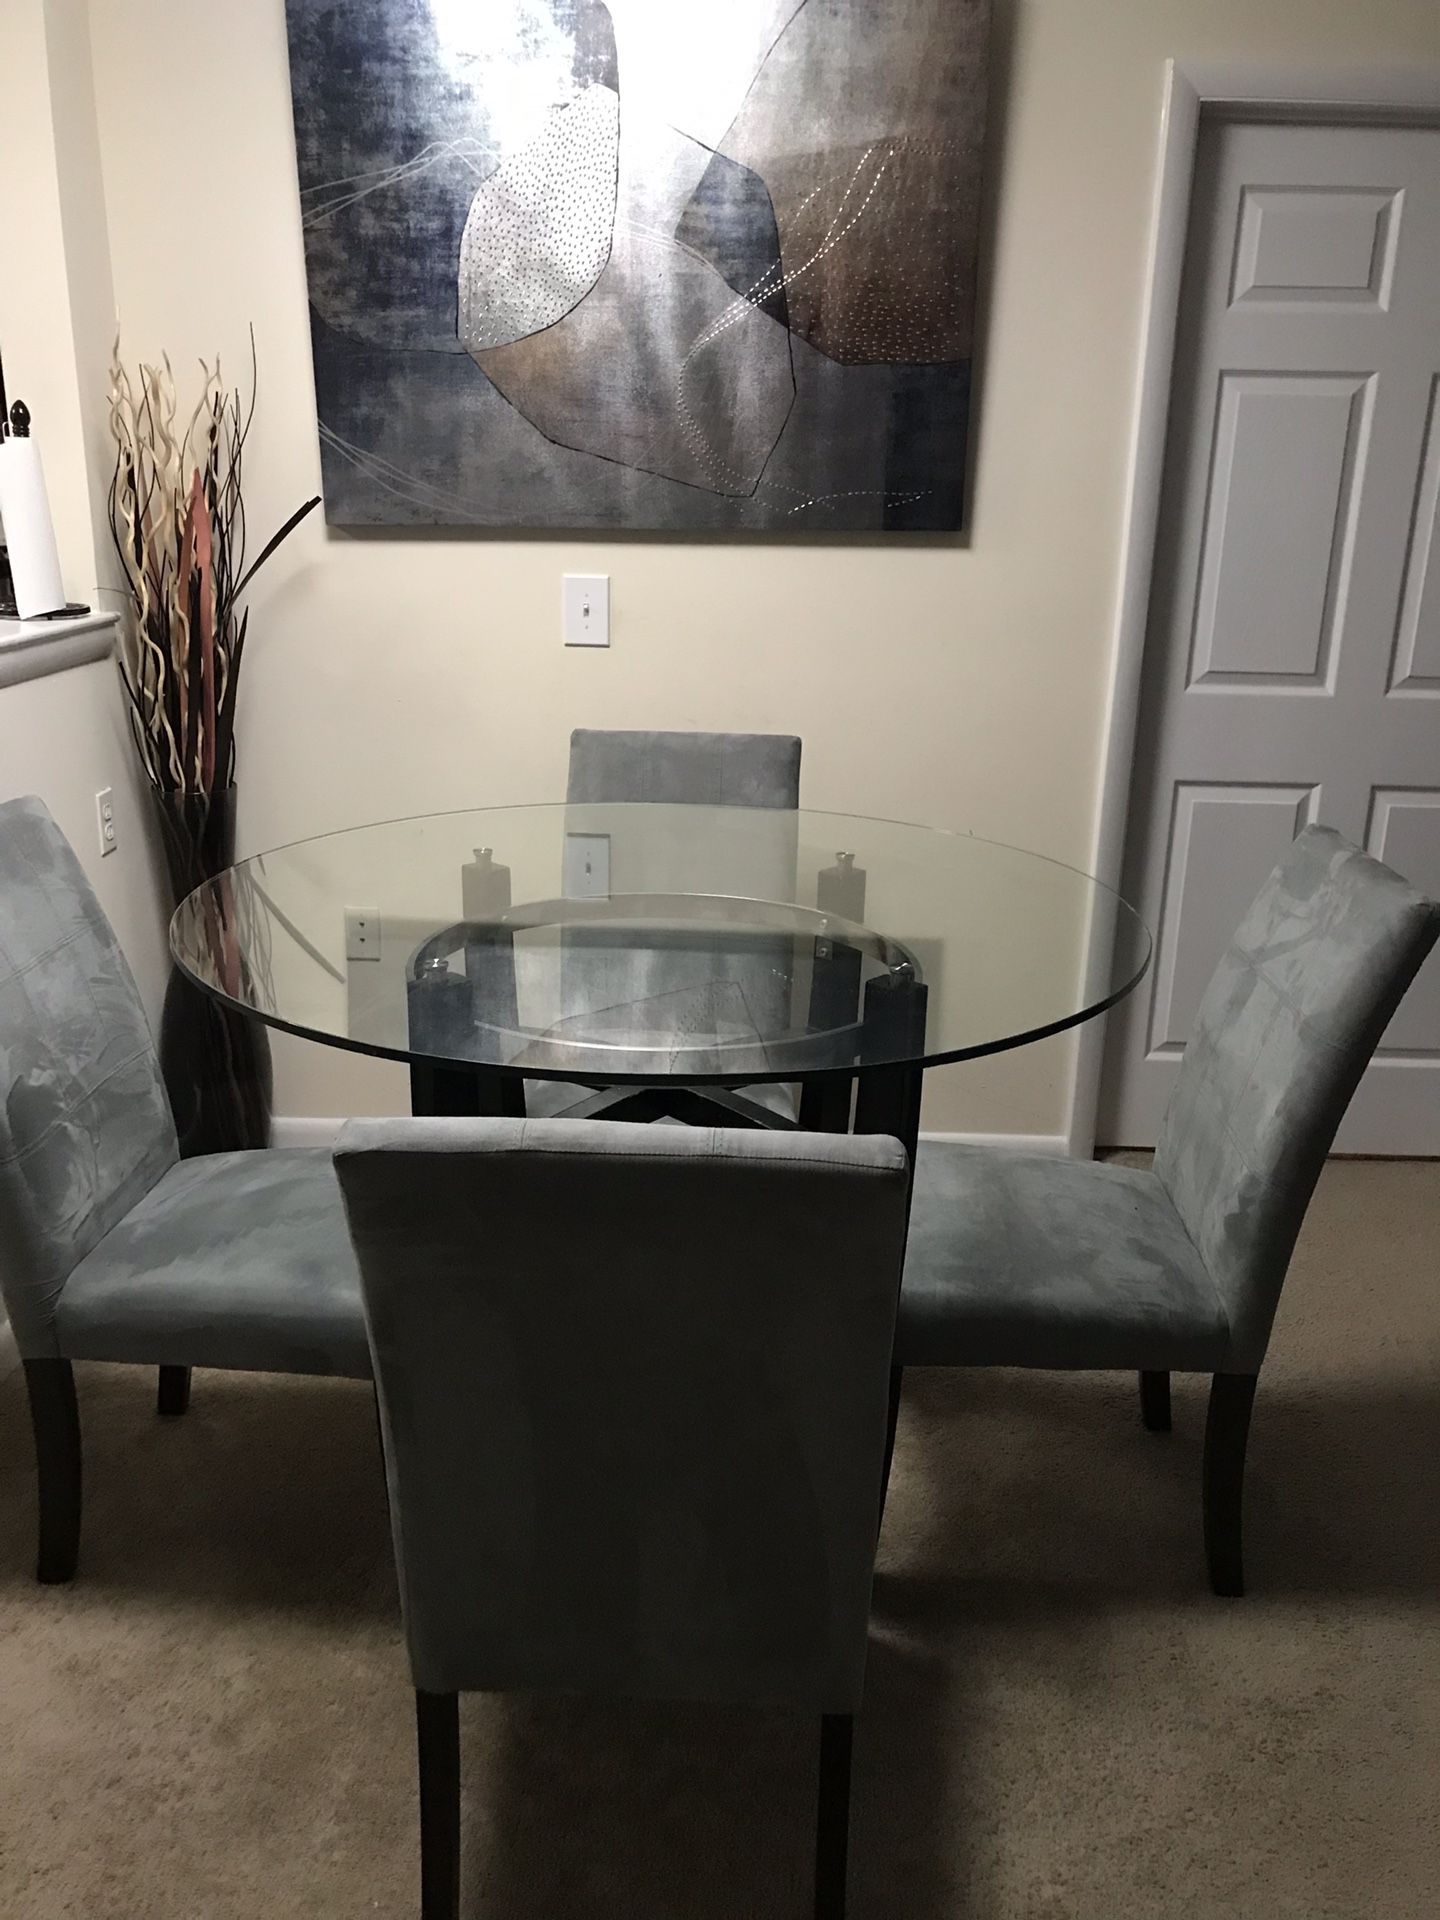 Glass round table, selling with chairs or separately